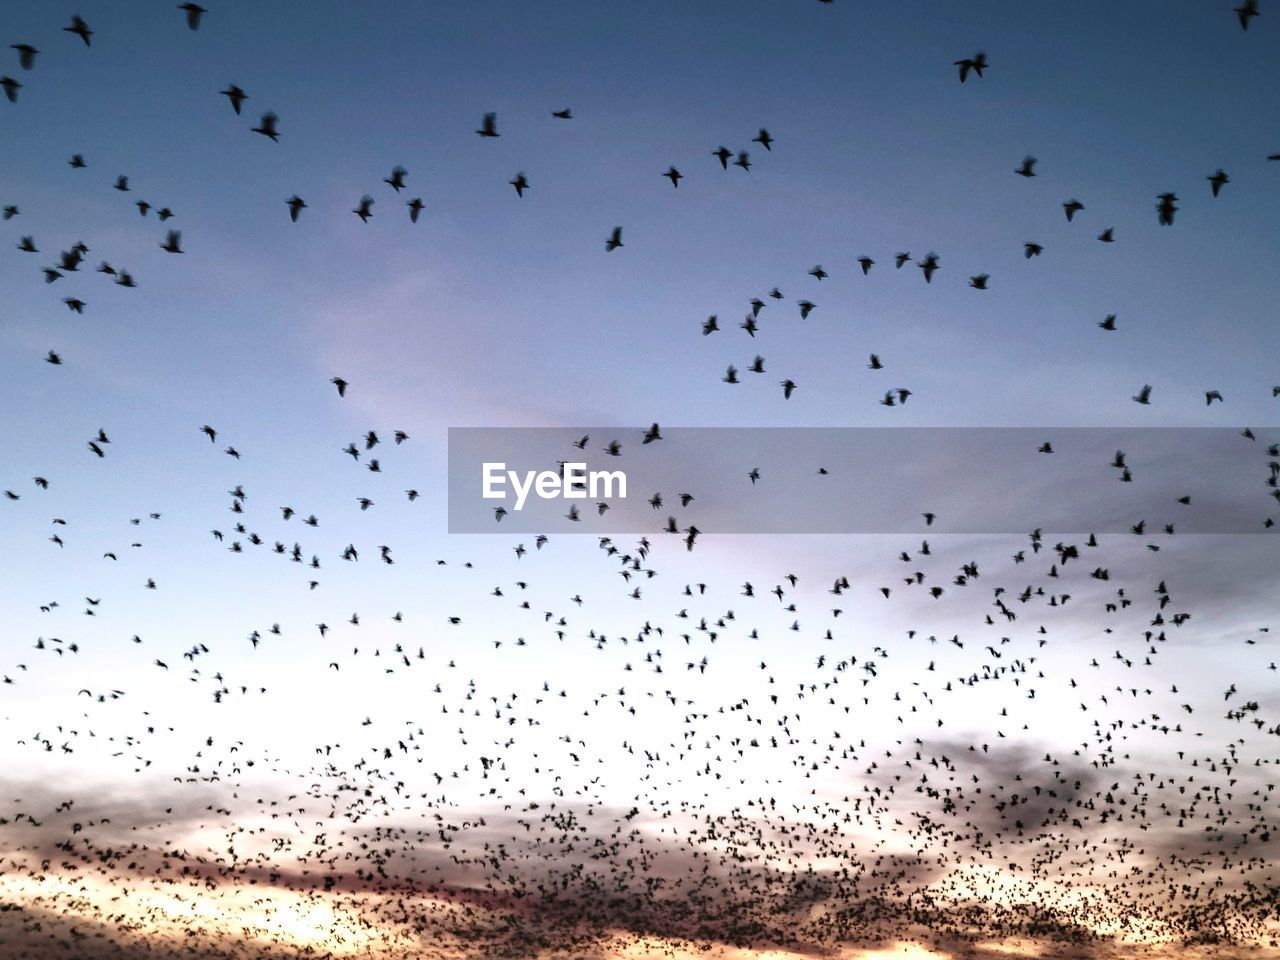 Travelling as dusk sets upon the earth, flocks of birds by the hundreds rise from the fields to soar